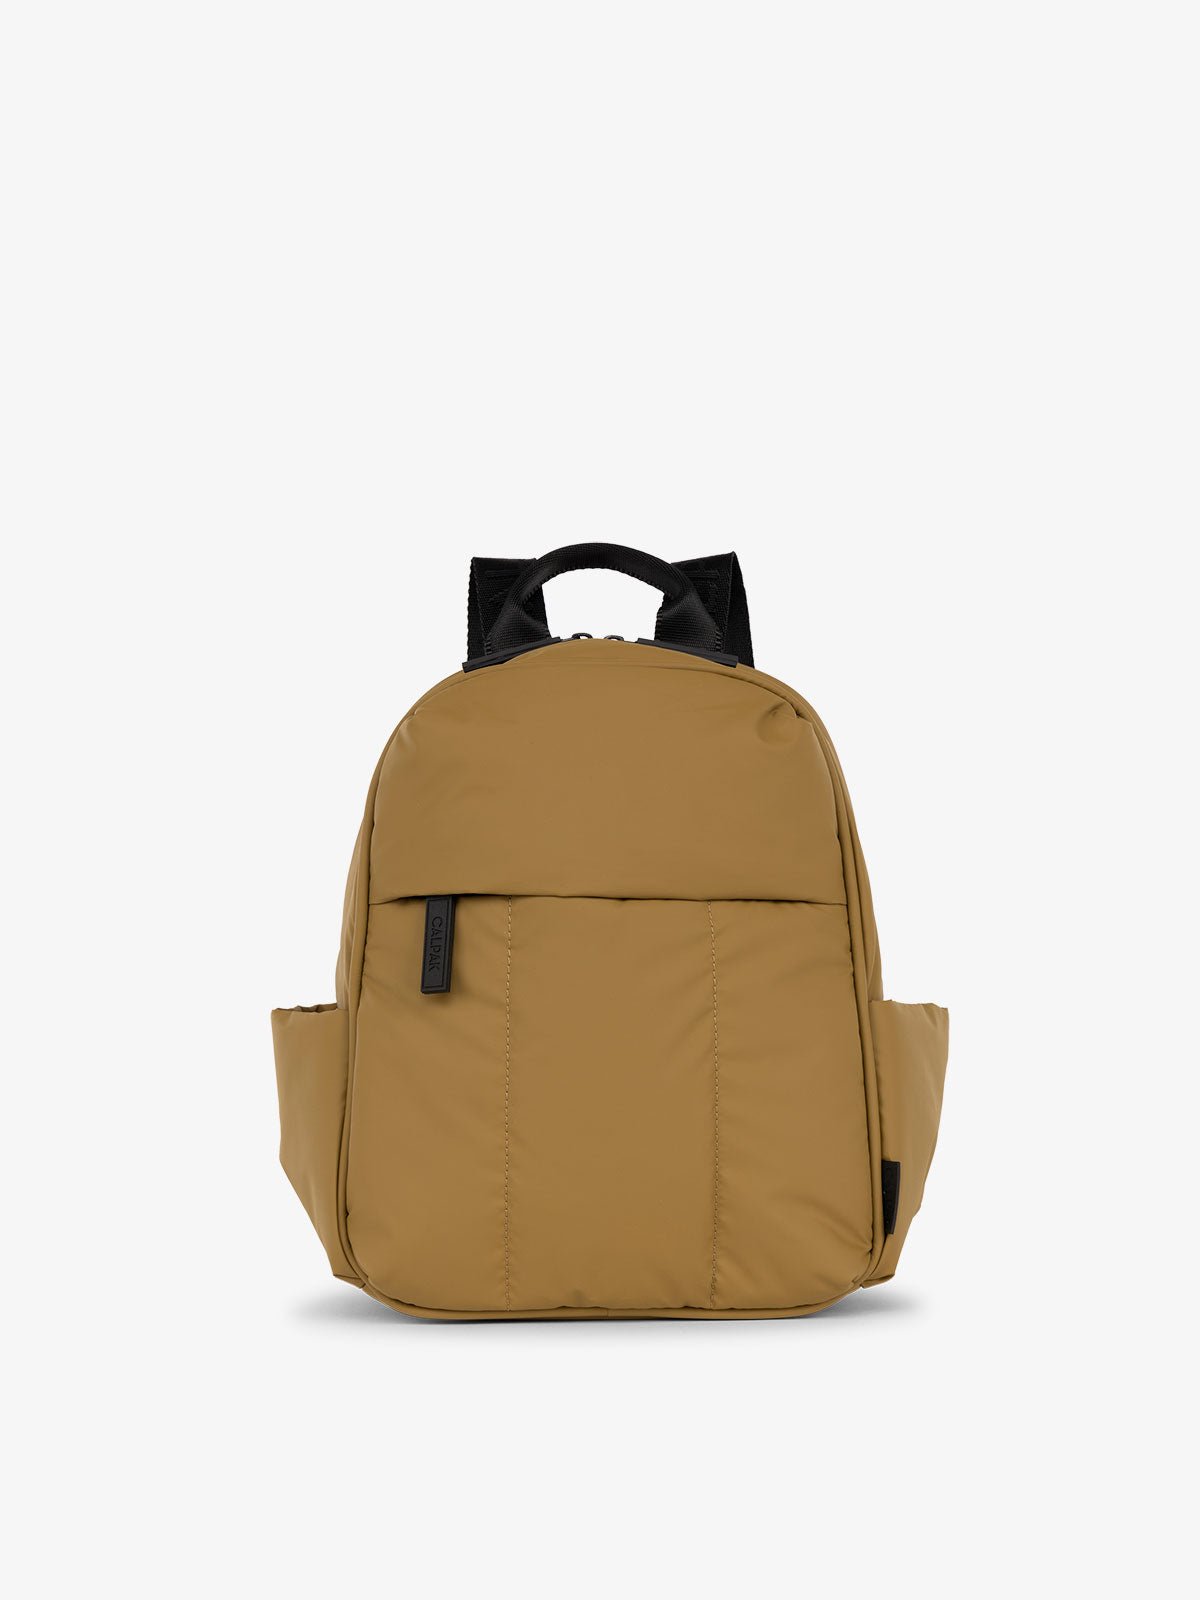 CALPAK Luka Mini Backpack for essentials for everyday use with puffy exterior and water resistant interior lining in khaki